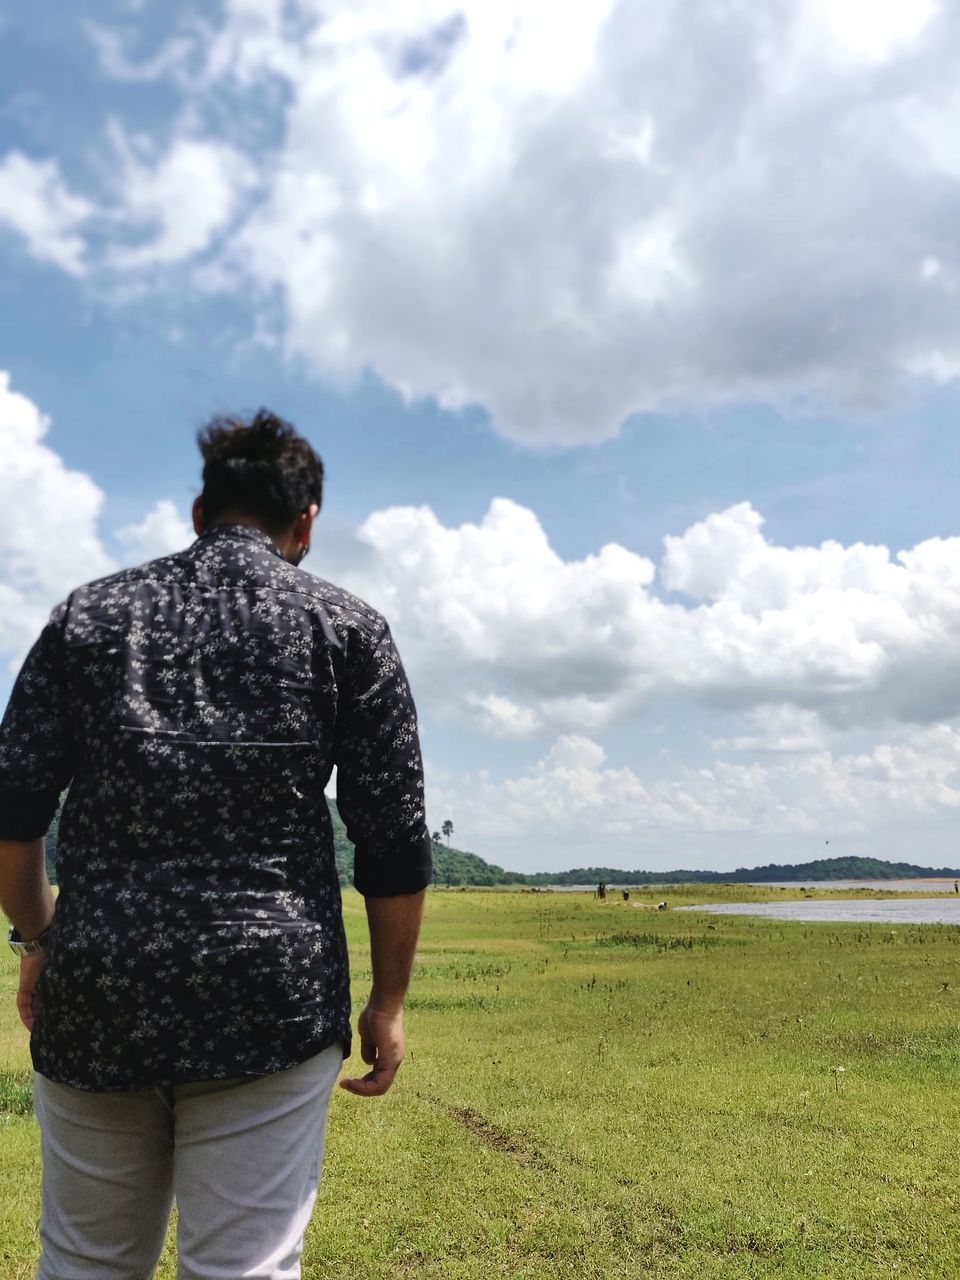 cloud - sky, sky, rear view, field, land, real people, leisure activity, nature, standing, day, lifestyles, grass, environment, landscape, non-urban scene, men, beauty in nature, tranquility, casual clothing, people, outdoors